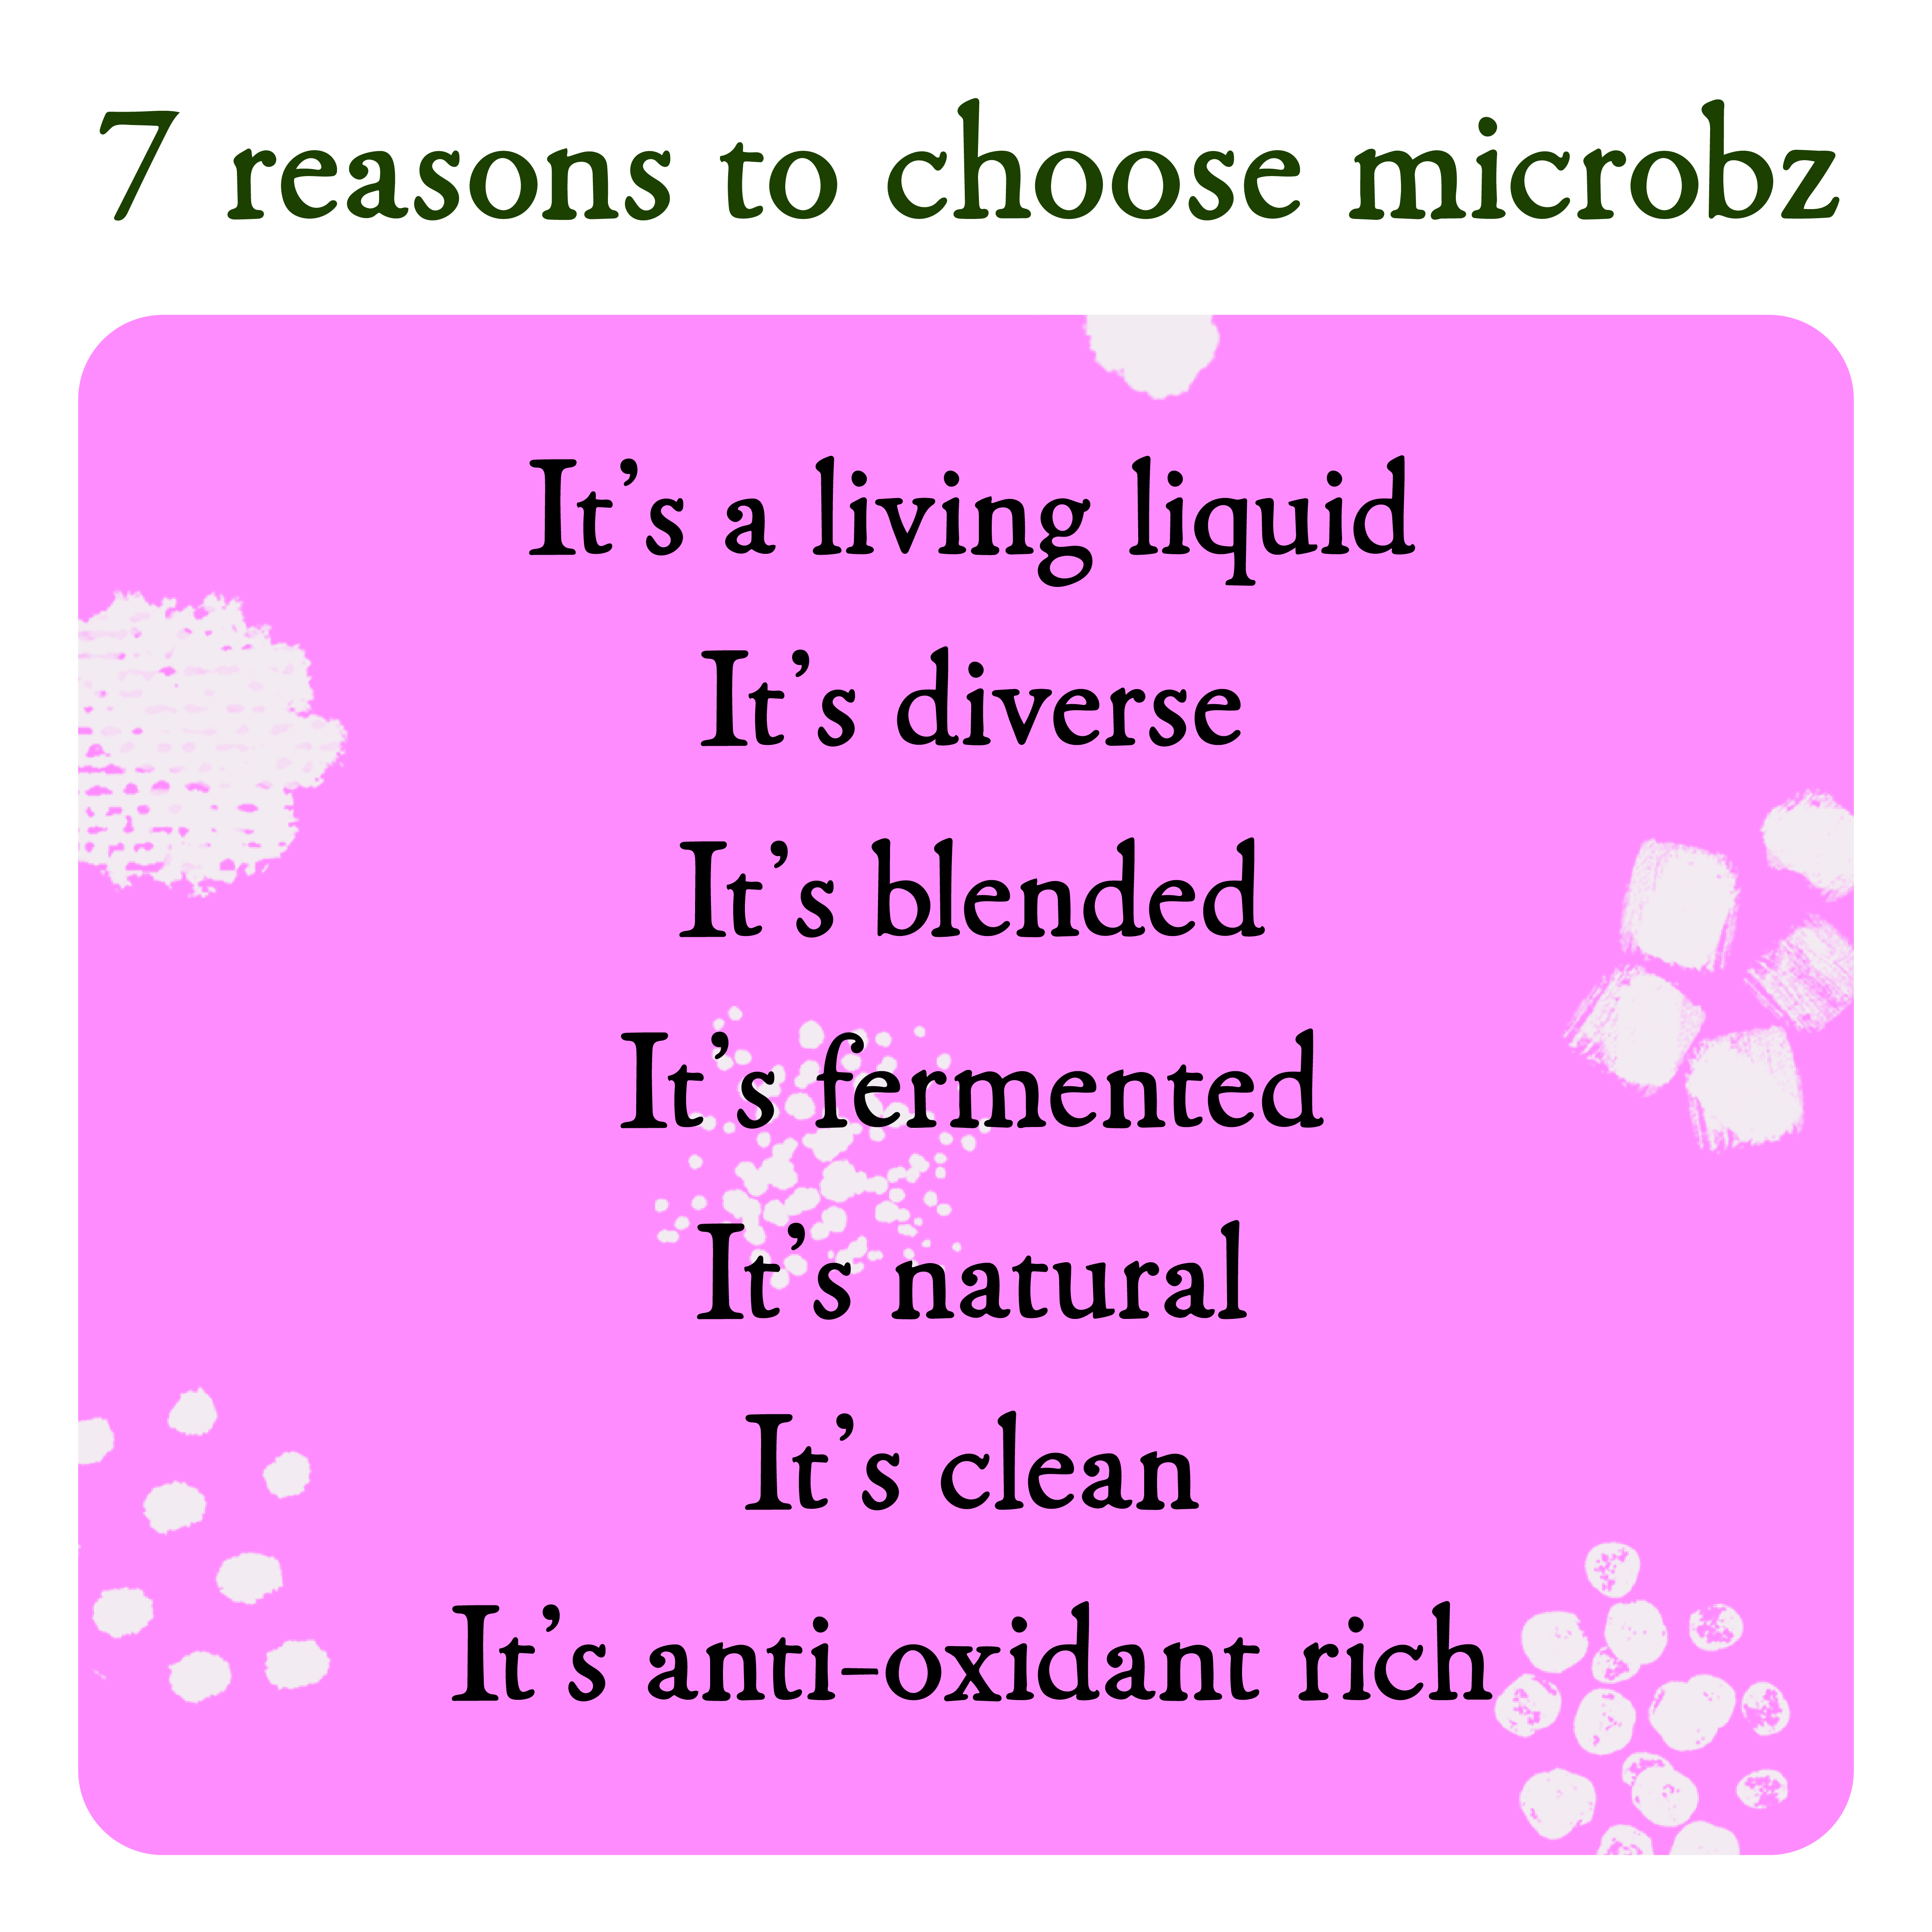 Illustration that says 7 reasons to choose microbz. It's a living liquid, it's diverse, it's blended, it's fermented, it's natural, it's clean, it's anti-oxidant rich